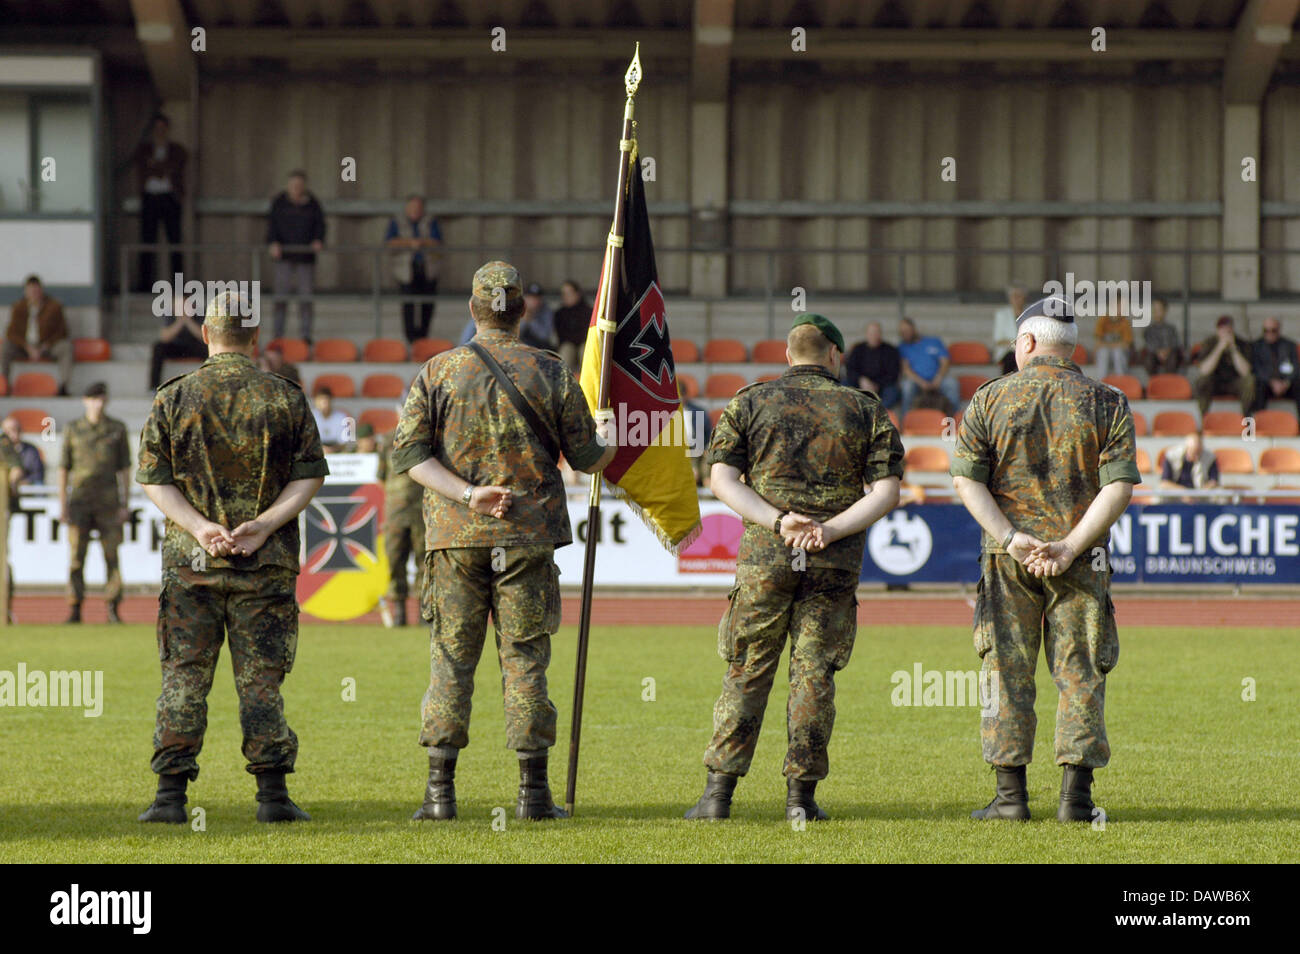 Bundeswehr soldiers and reservists muster prior to the Helmstedt-Haldensleben reservists' march at the Masch Stadium in Helmstedt, Germany, 08 October 2005. Photo: Stefan Haehnsen Stock Photo